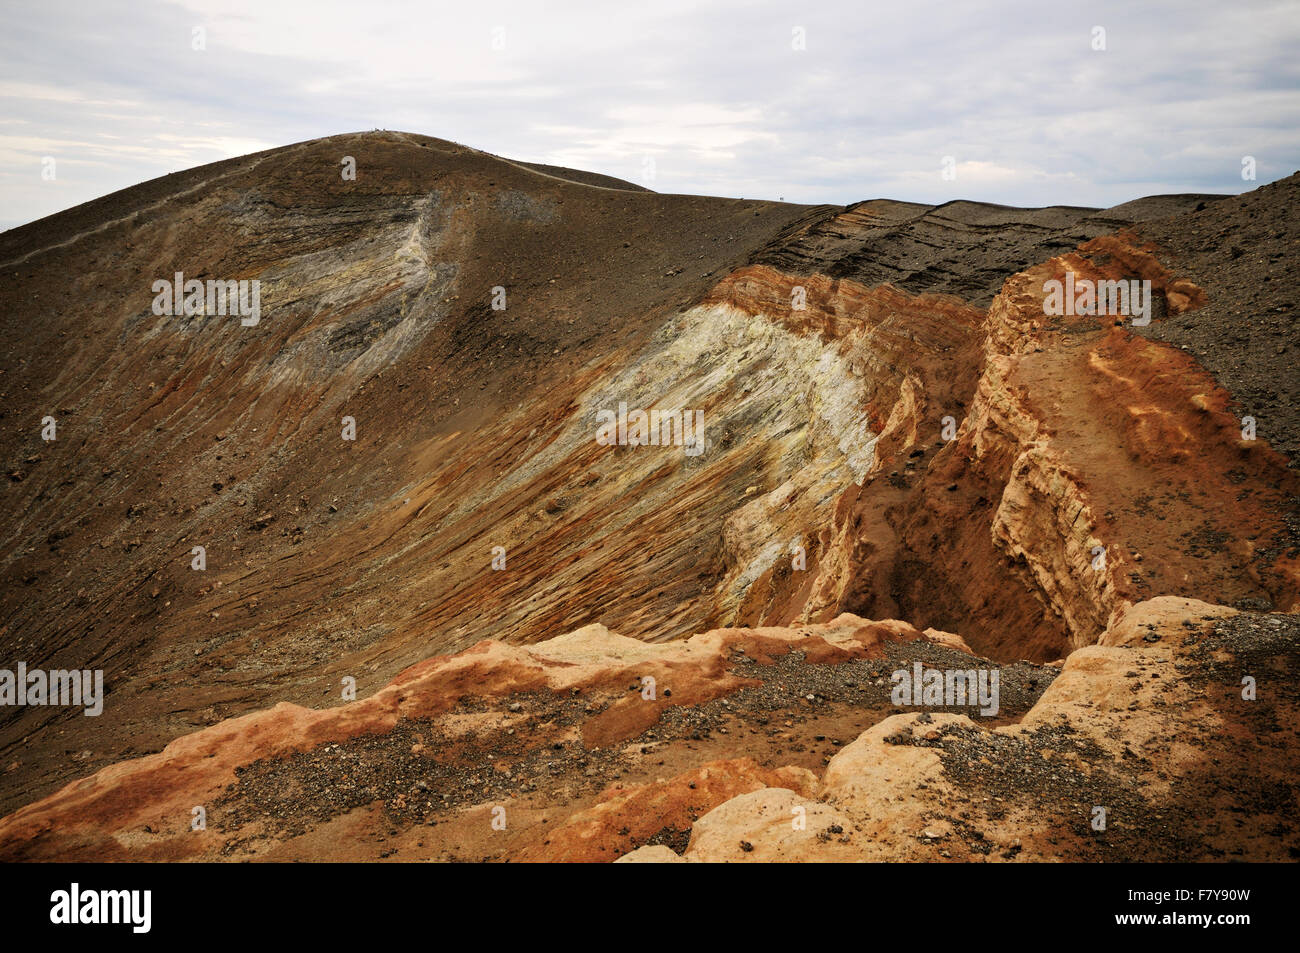 Ridge of the active crater (Gran Cratere) of Vulcano, Aeolian Islands, Sicily, Italy Stock Photo